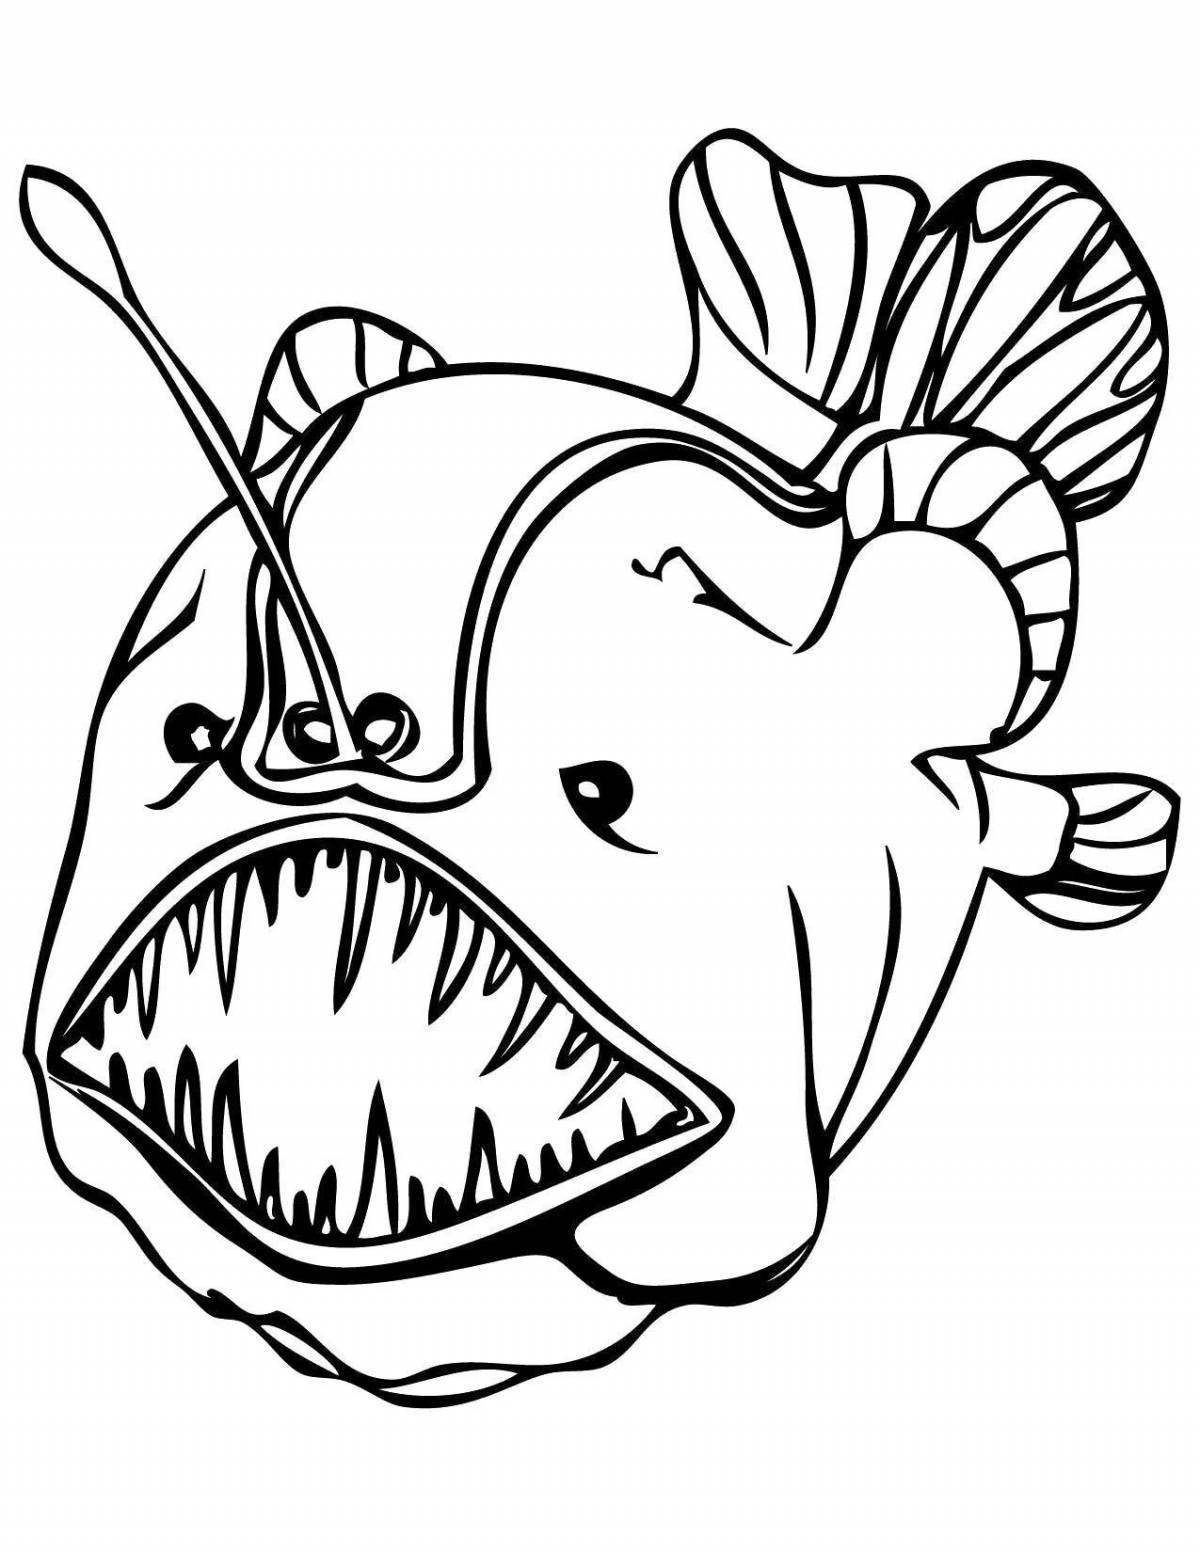 Colorful angler coloring page